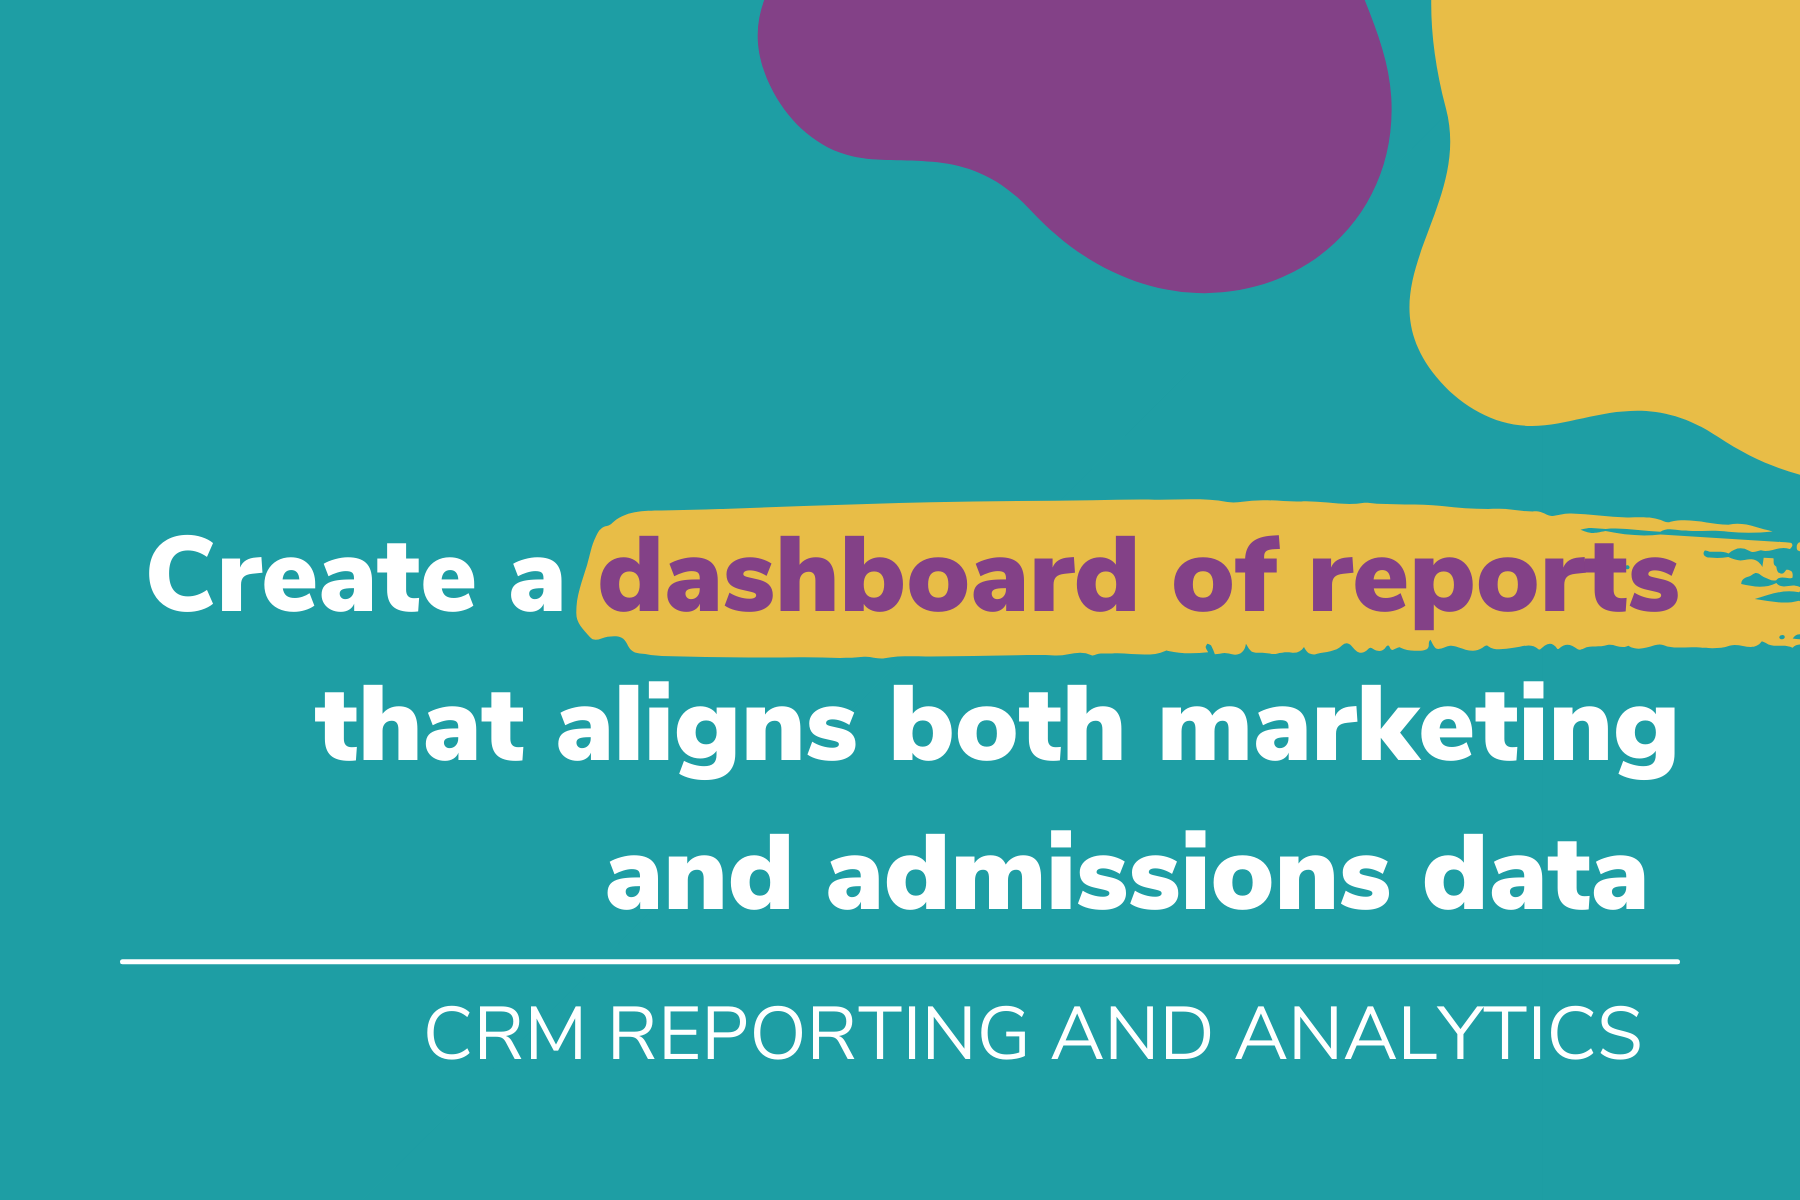 Align Admissions and Marketing Teams through Shared Reporting Dashboards 